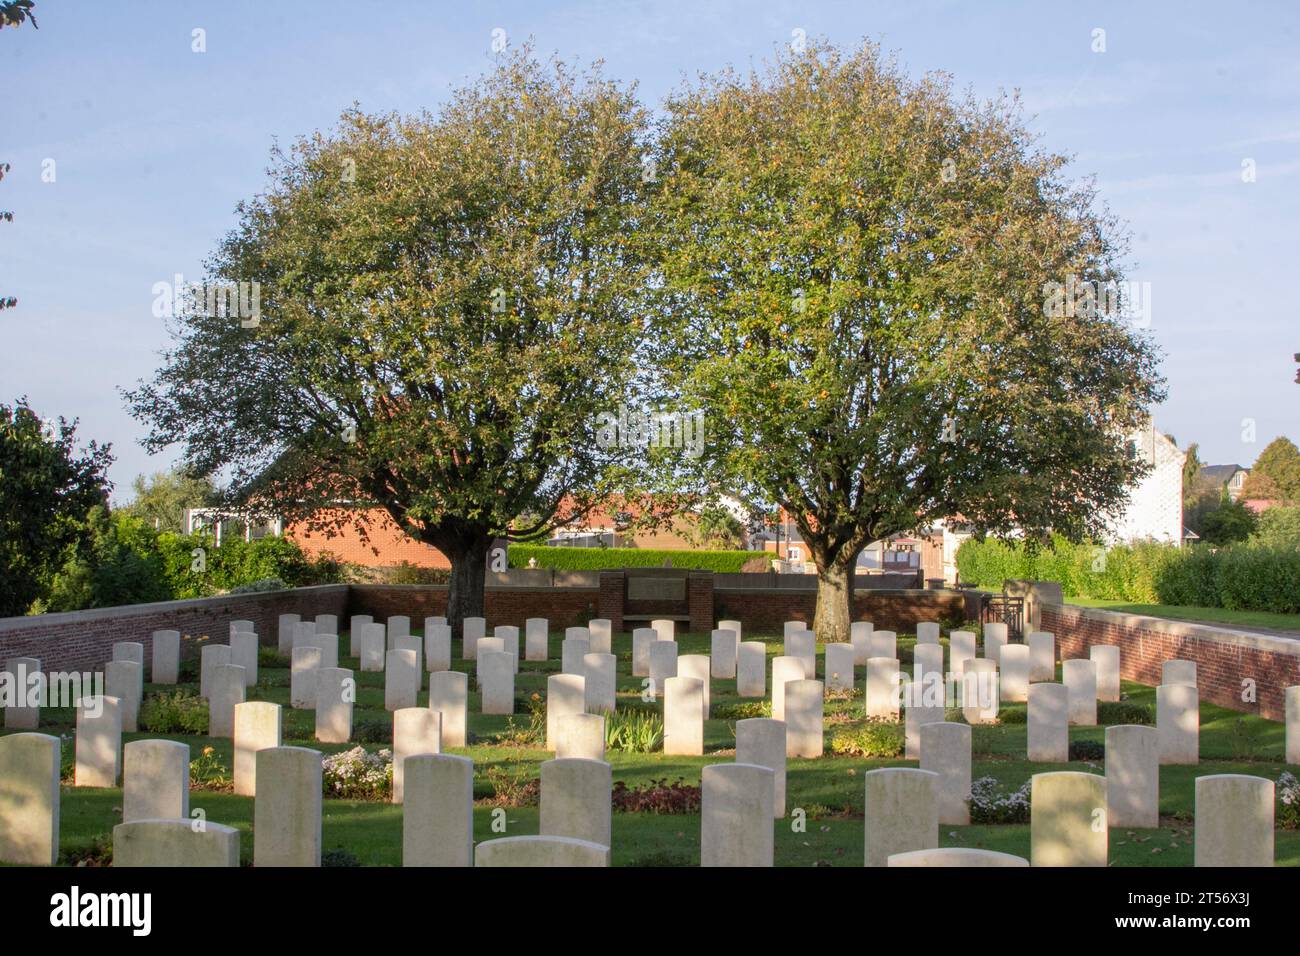 The Hermies British WW1 cemetery in the eponymous village in northern France just east of the Somme battlefields. Stock Photo